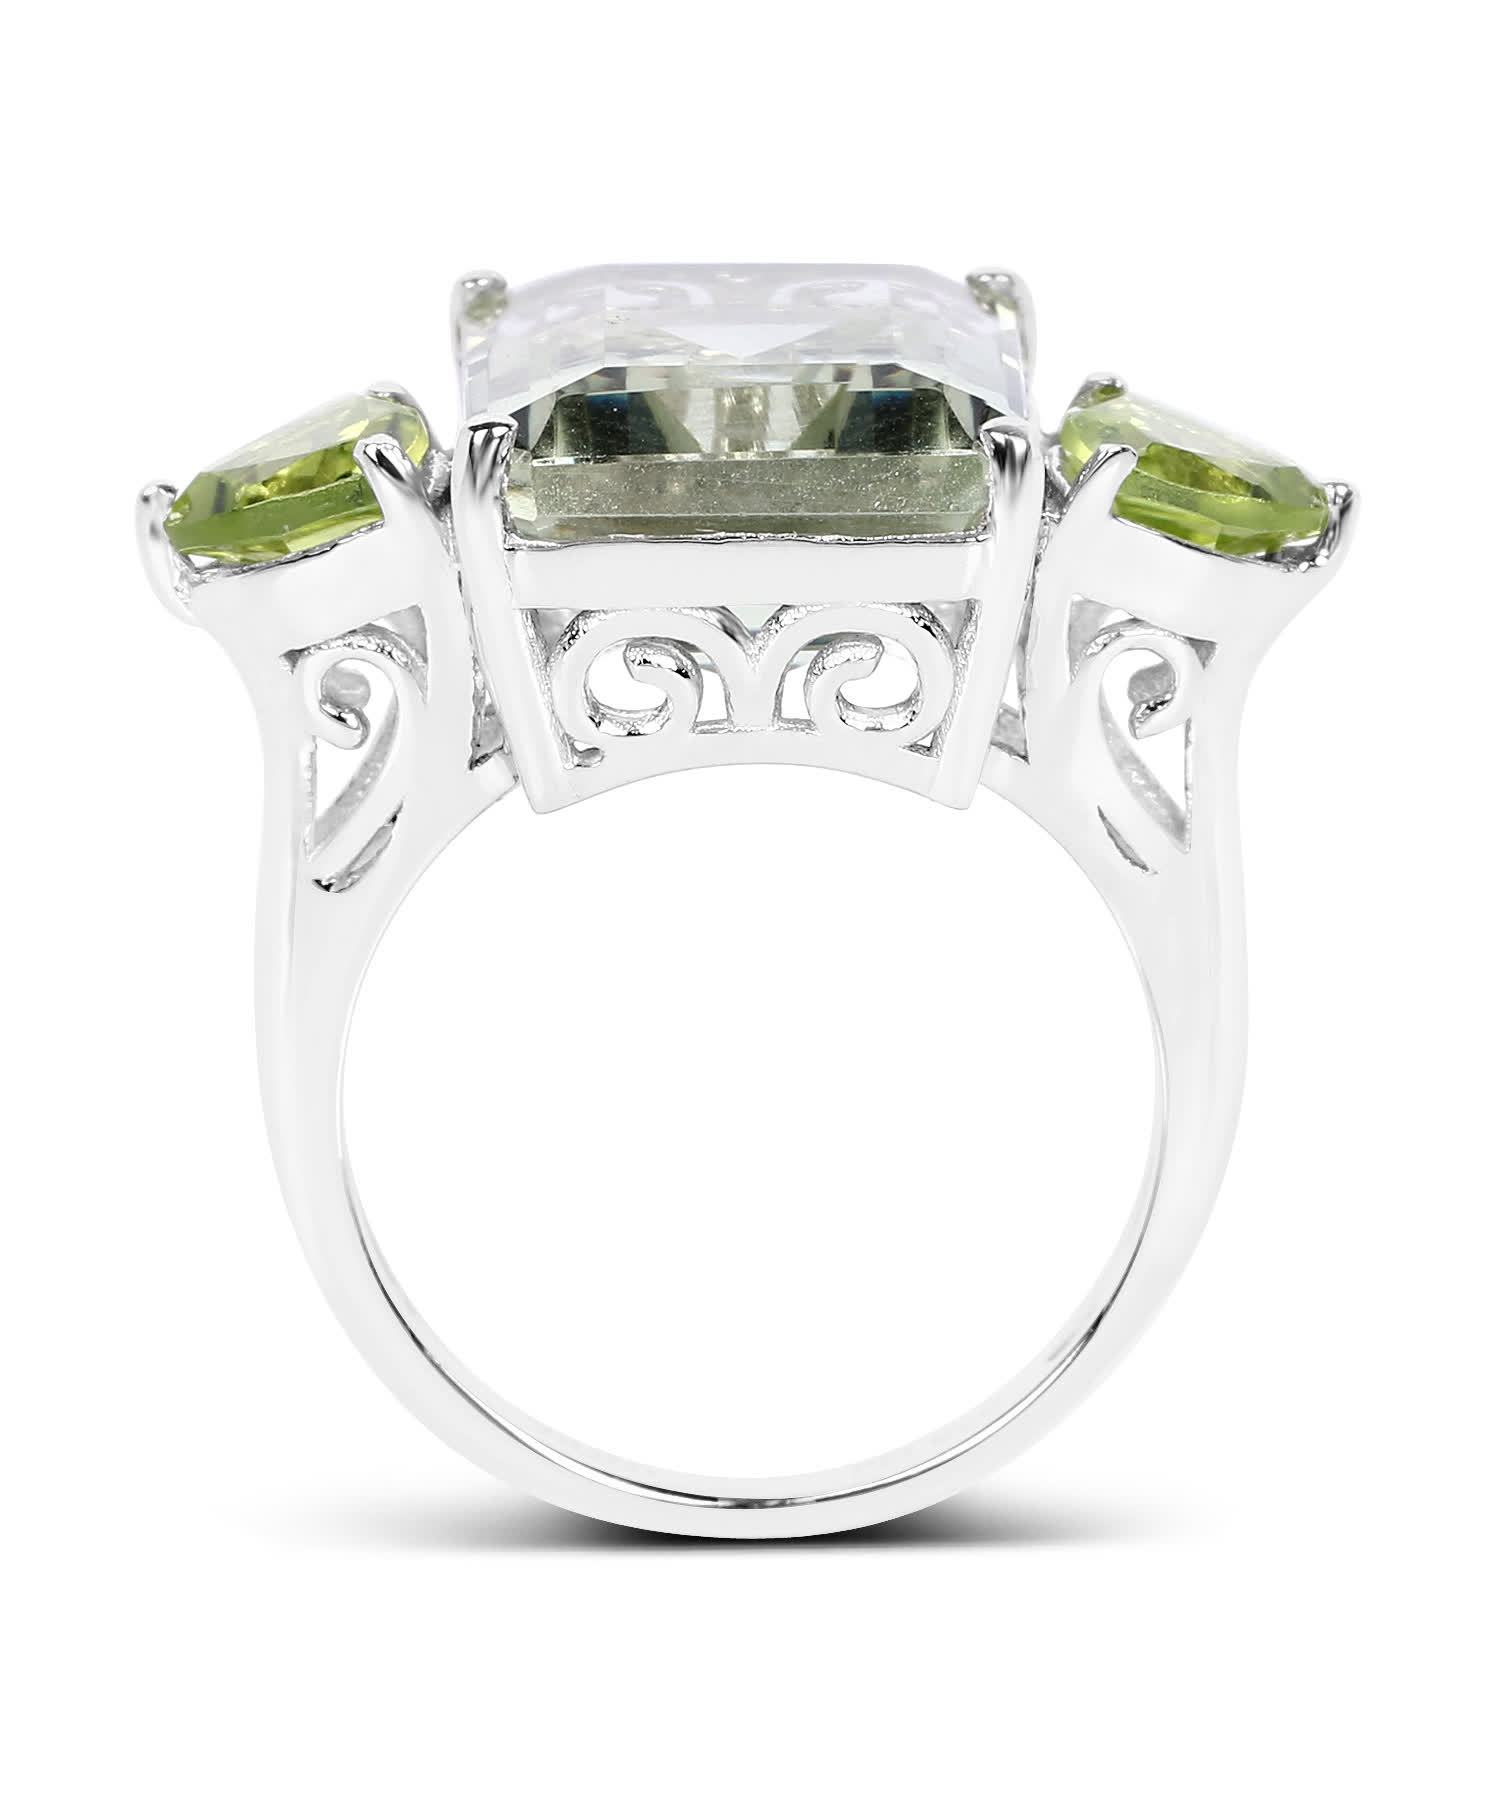 11.90ctw Natural Green Amethyst and Peridot Rhodium Plated 925 Sterling Silver Cocktail Ring View 2